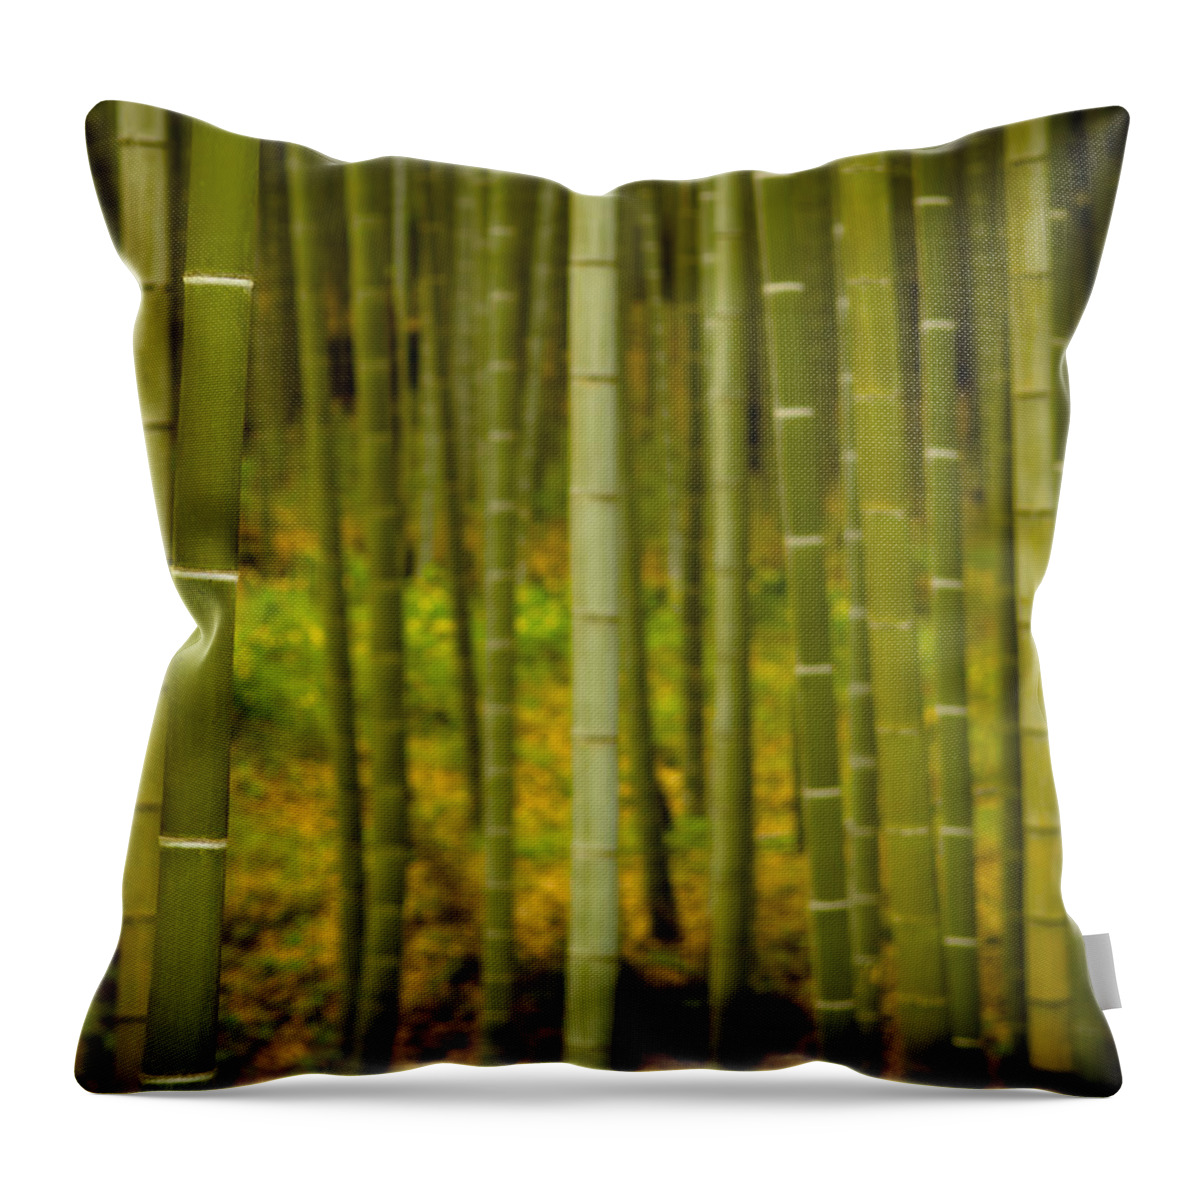 Bamboo Throw Pillow featuring the photograph Mystical Bamboo #1 by Sebastian Musial